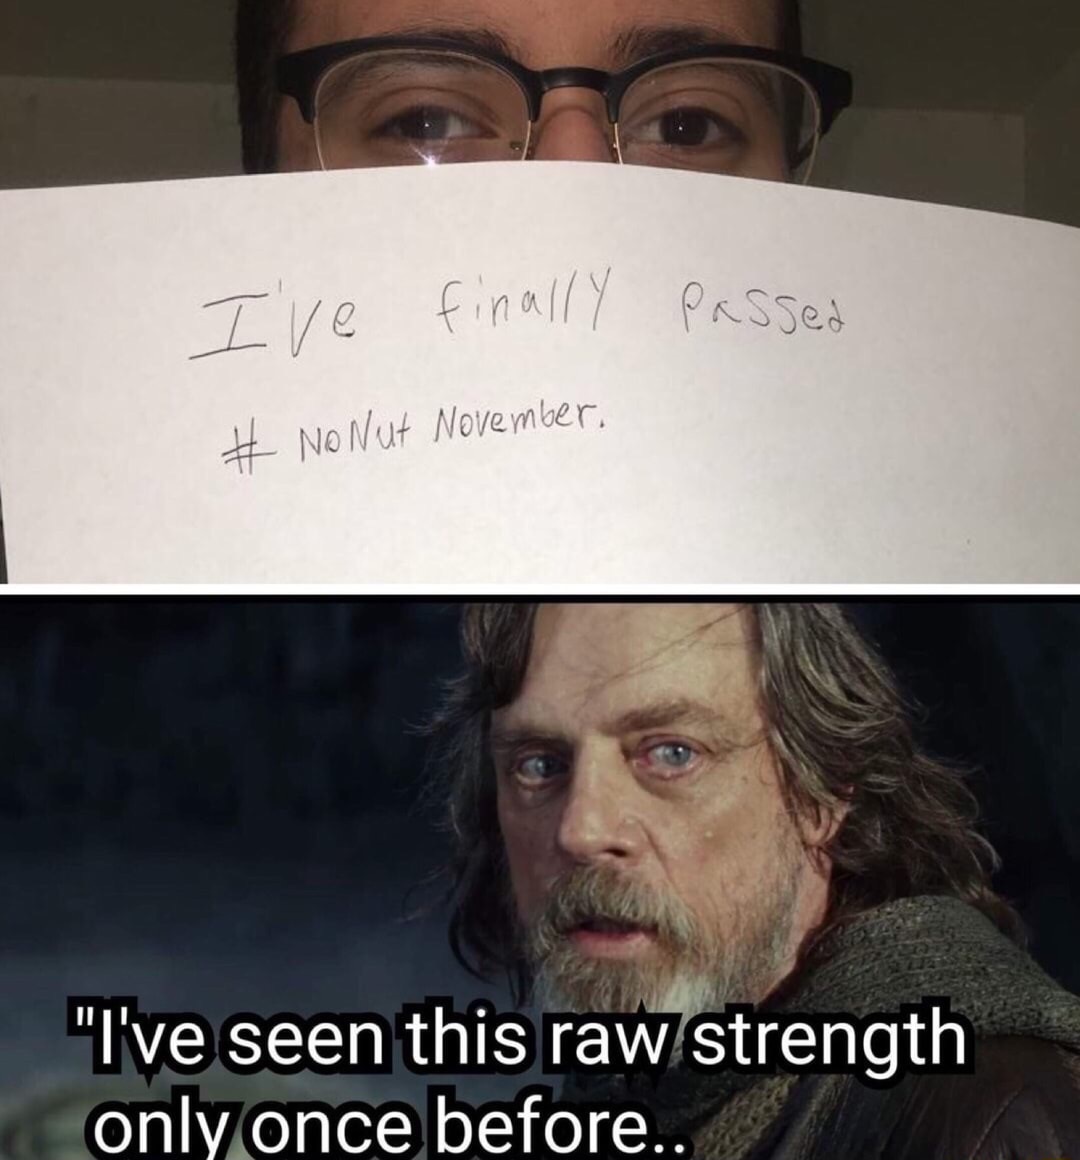 Dank meme of someone who claims to have passed no-nut-november and Mark Hamil as Luke Skywalker in Star Wars The Last Jedi saying I've seen this raw strength only once before